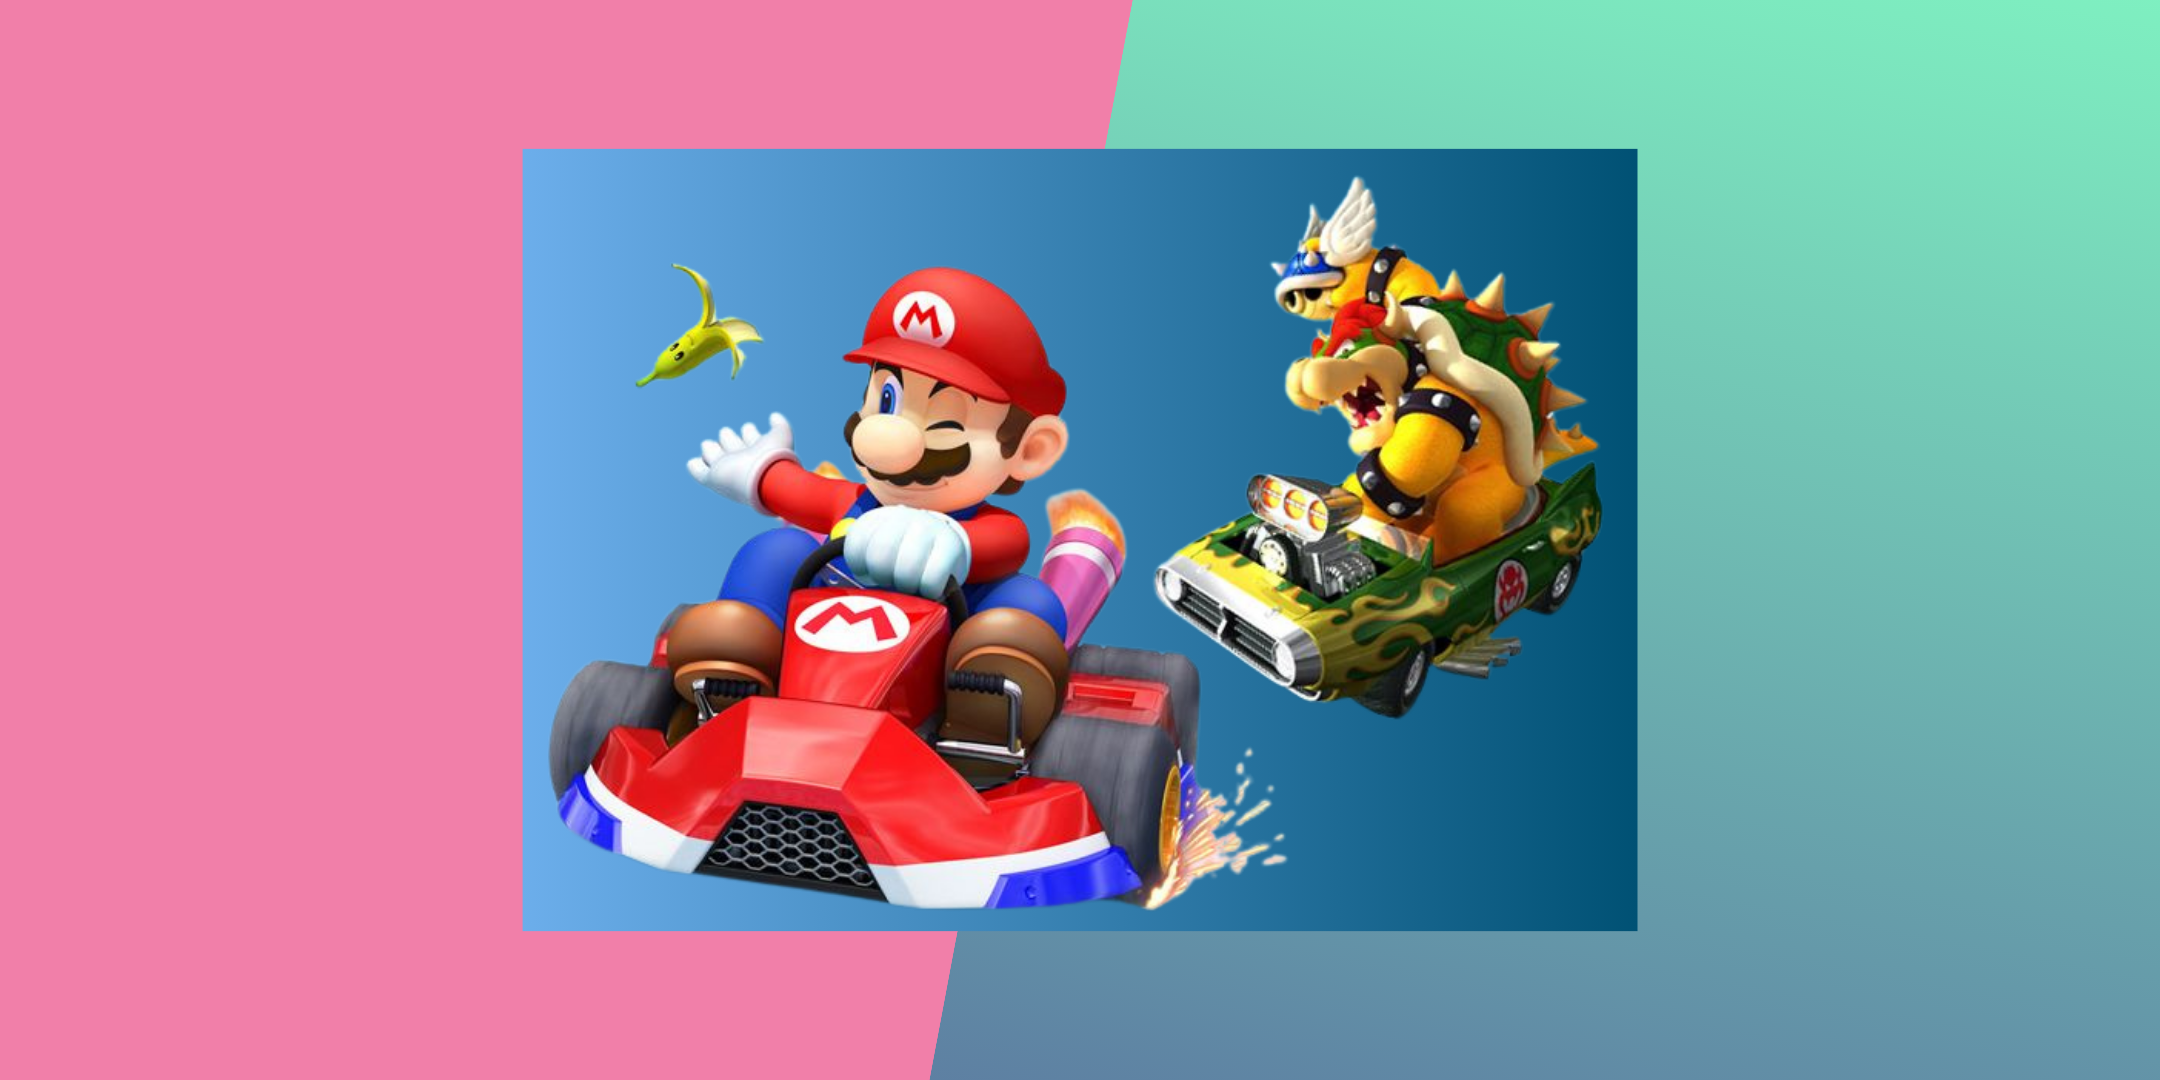 green and pink background with mariokart